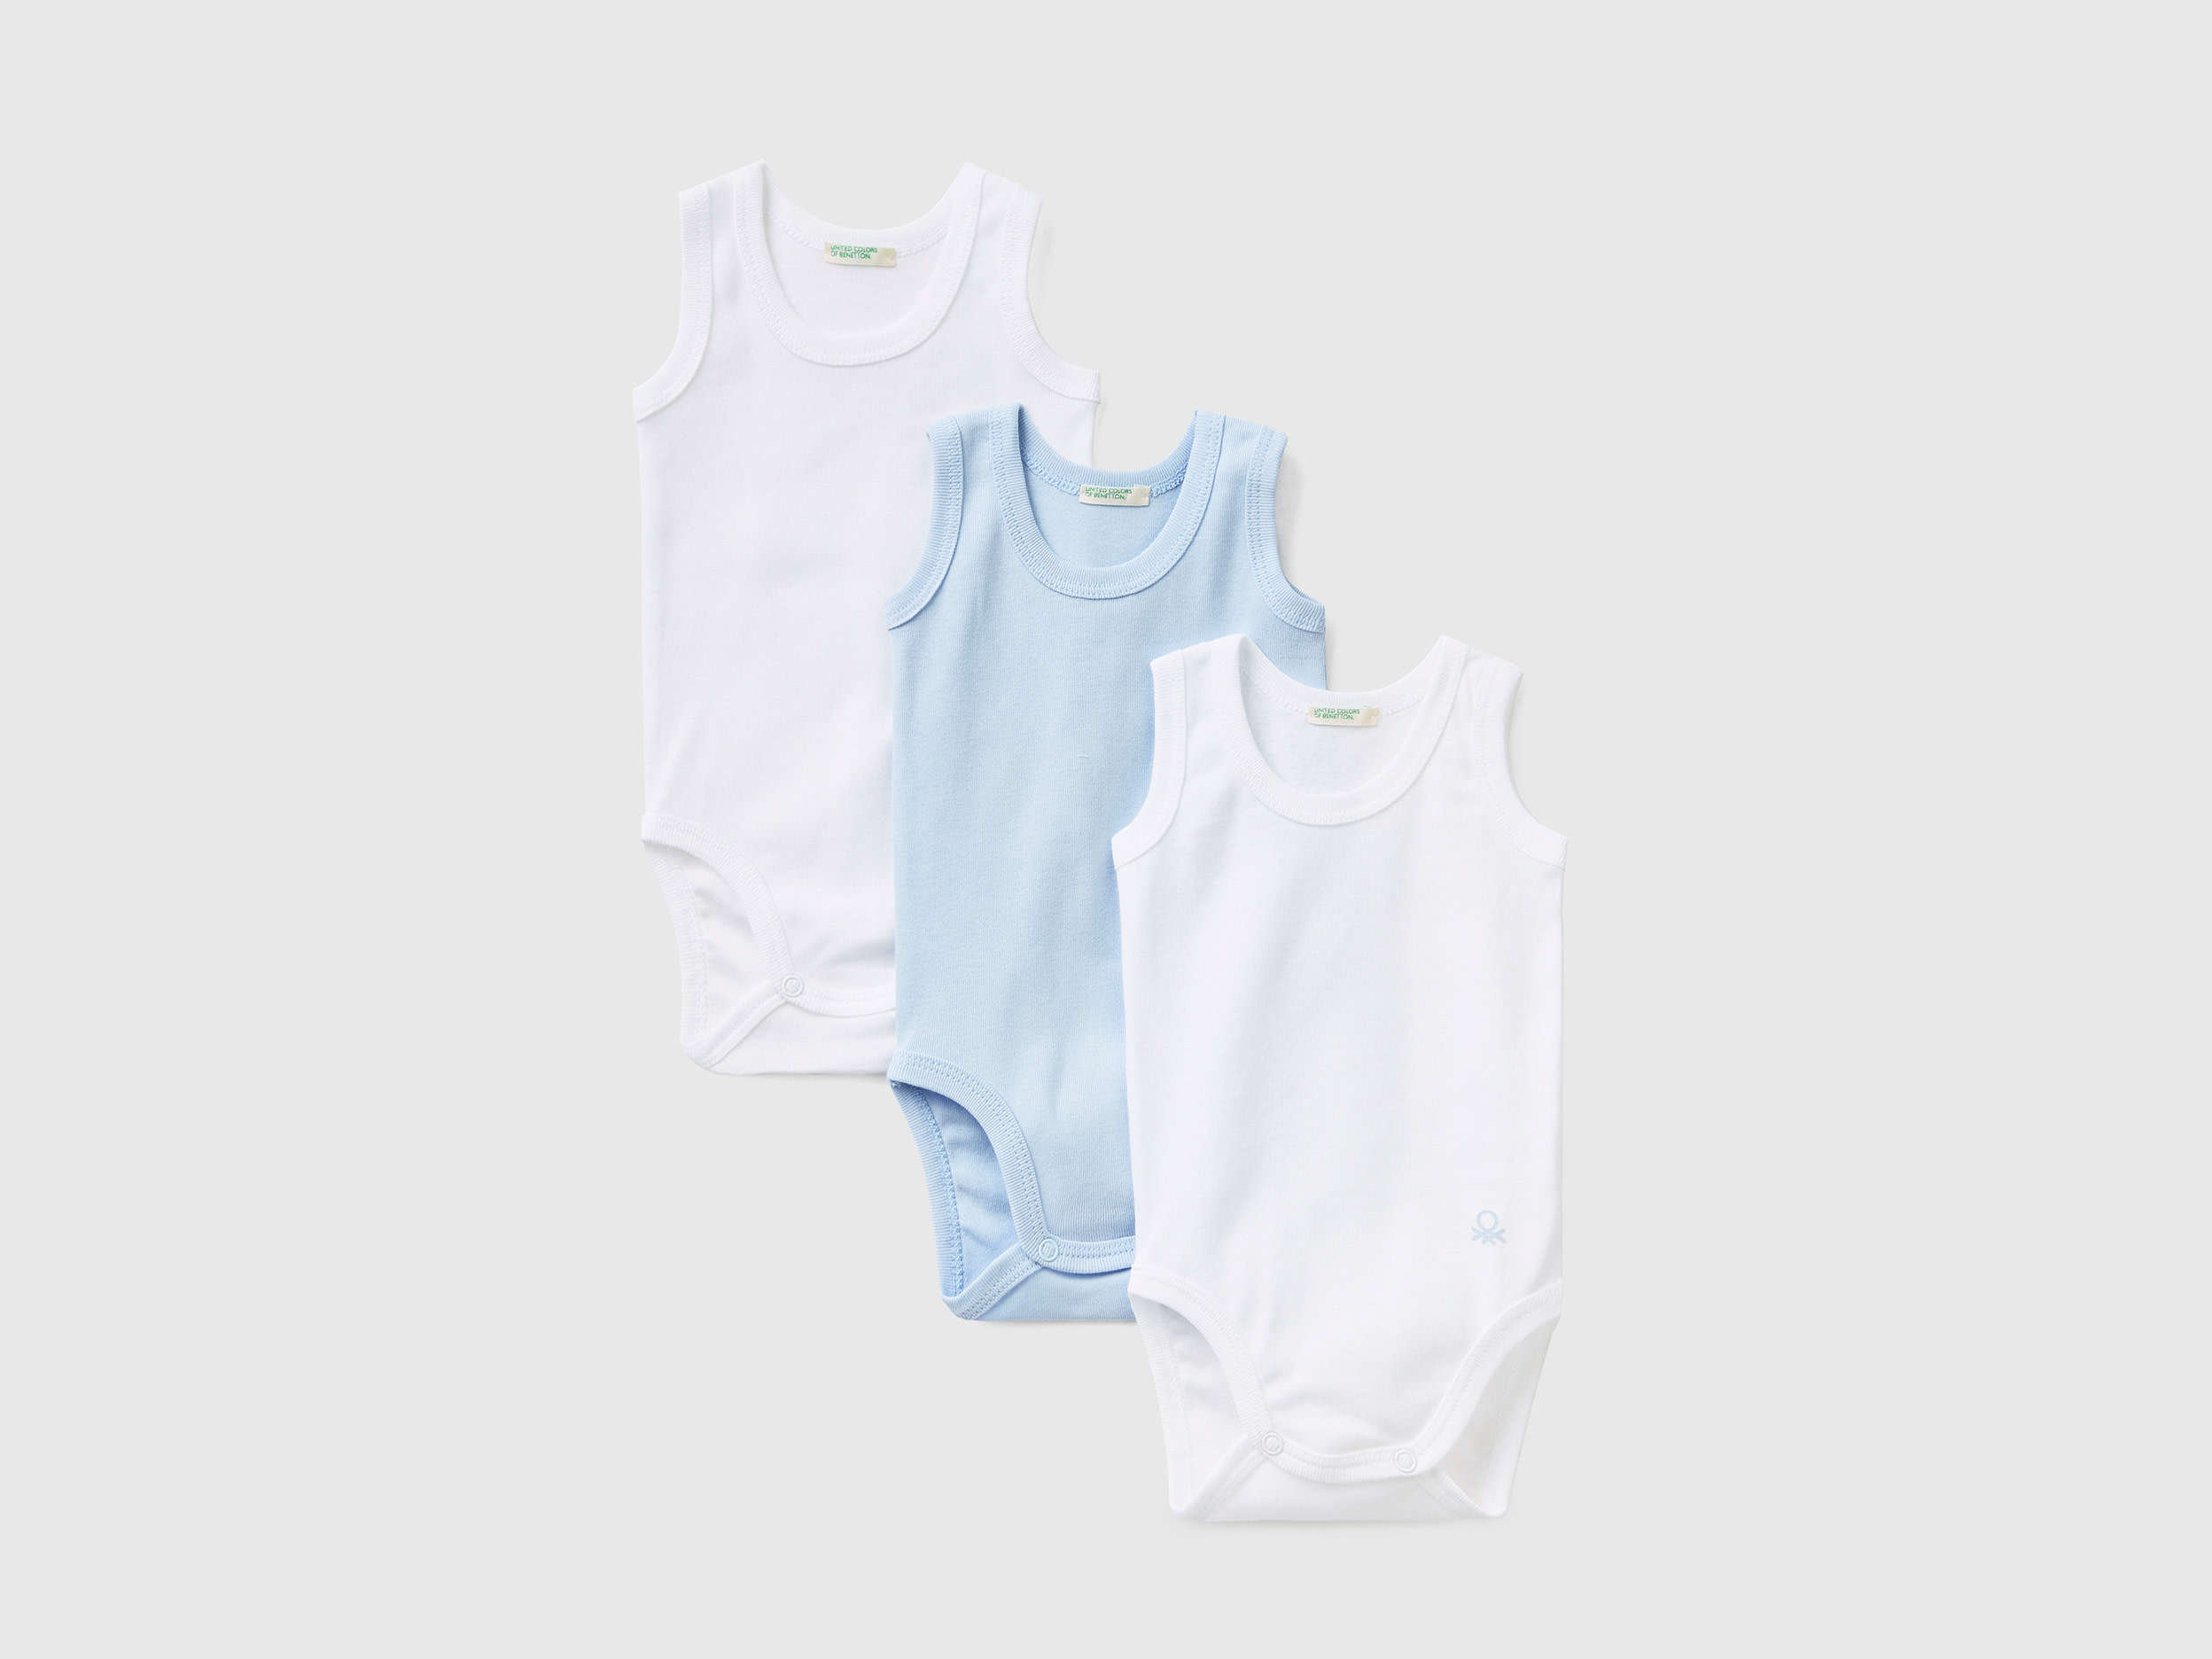 Image of Benetton, Three Solid Color Tank Top Bodysuits, size 82, Light Blue, Kids